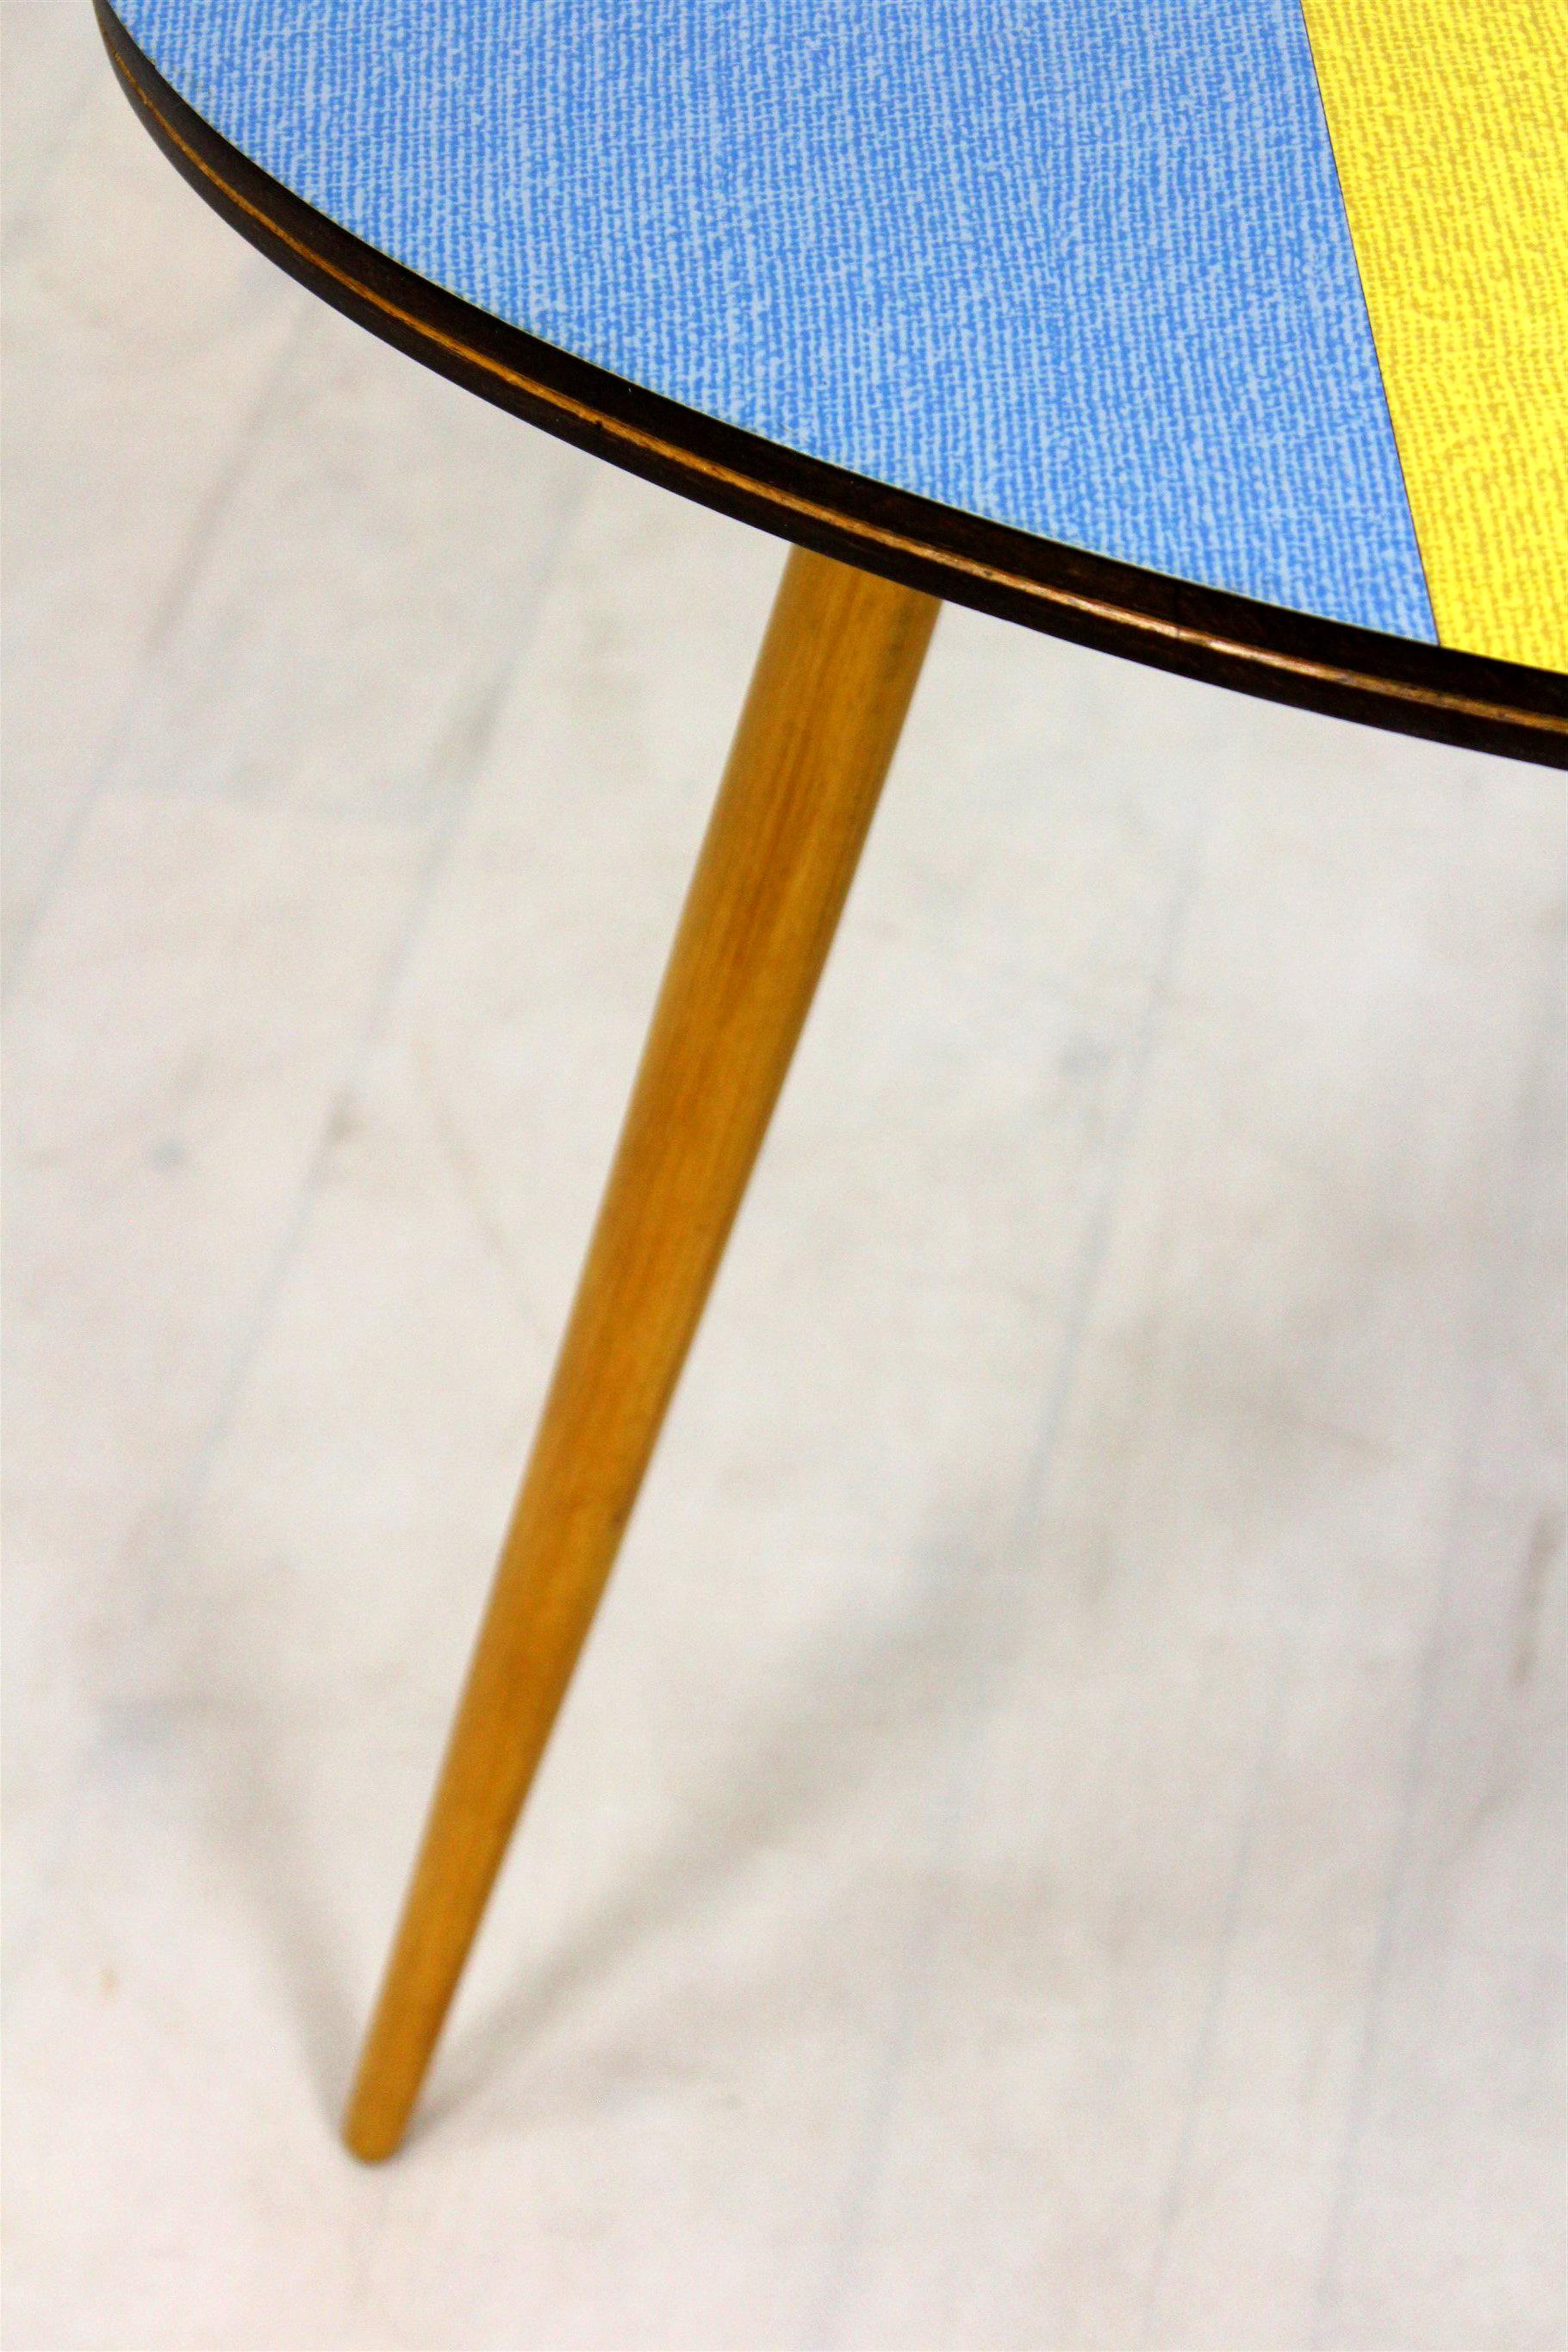 Mid-Century Modern Restored Formica Coffee Table from Drevopodnik Brno, 1960s For Sale